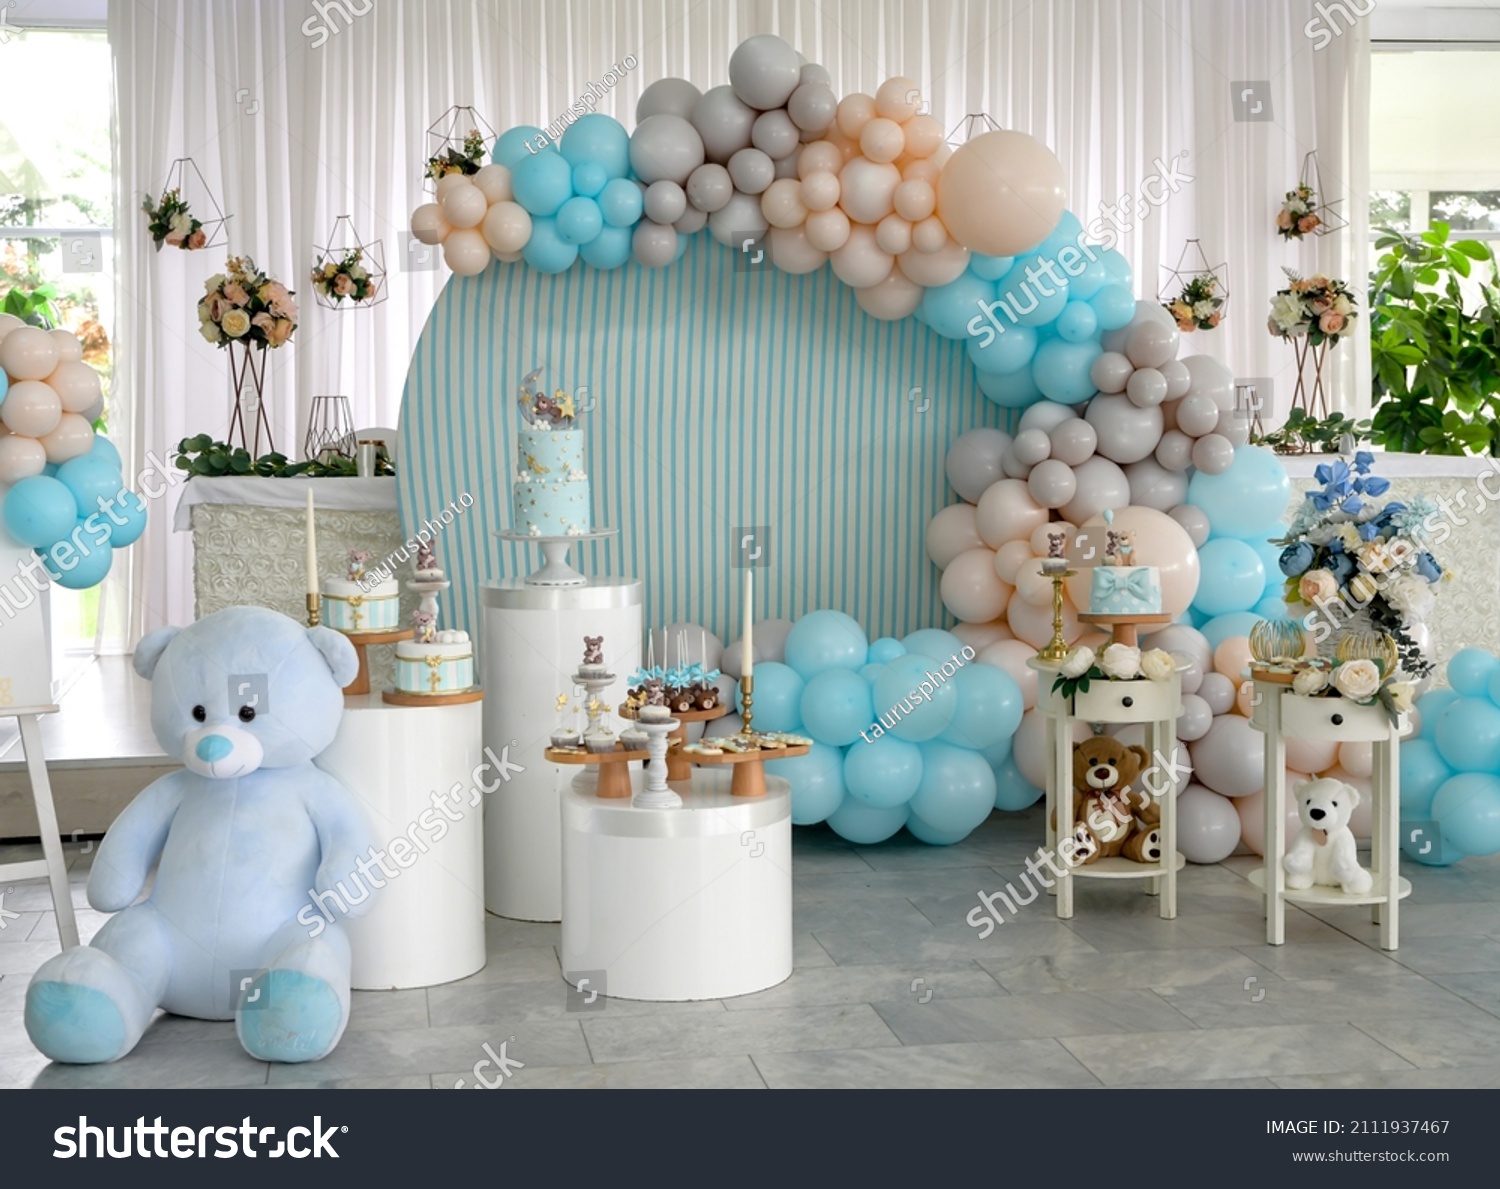 Happy Birthday! Children's decoration with glowing lights, birthday garland, different color of balloons. Decorated photo zone. Festive decorative elements, photo area #2111937467